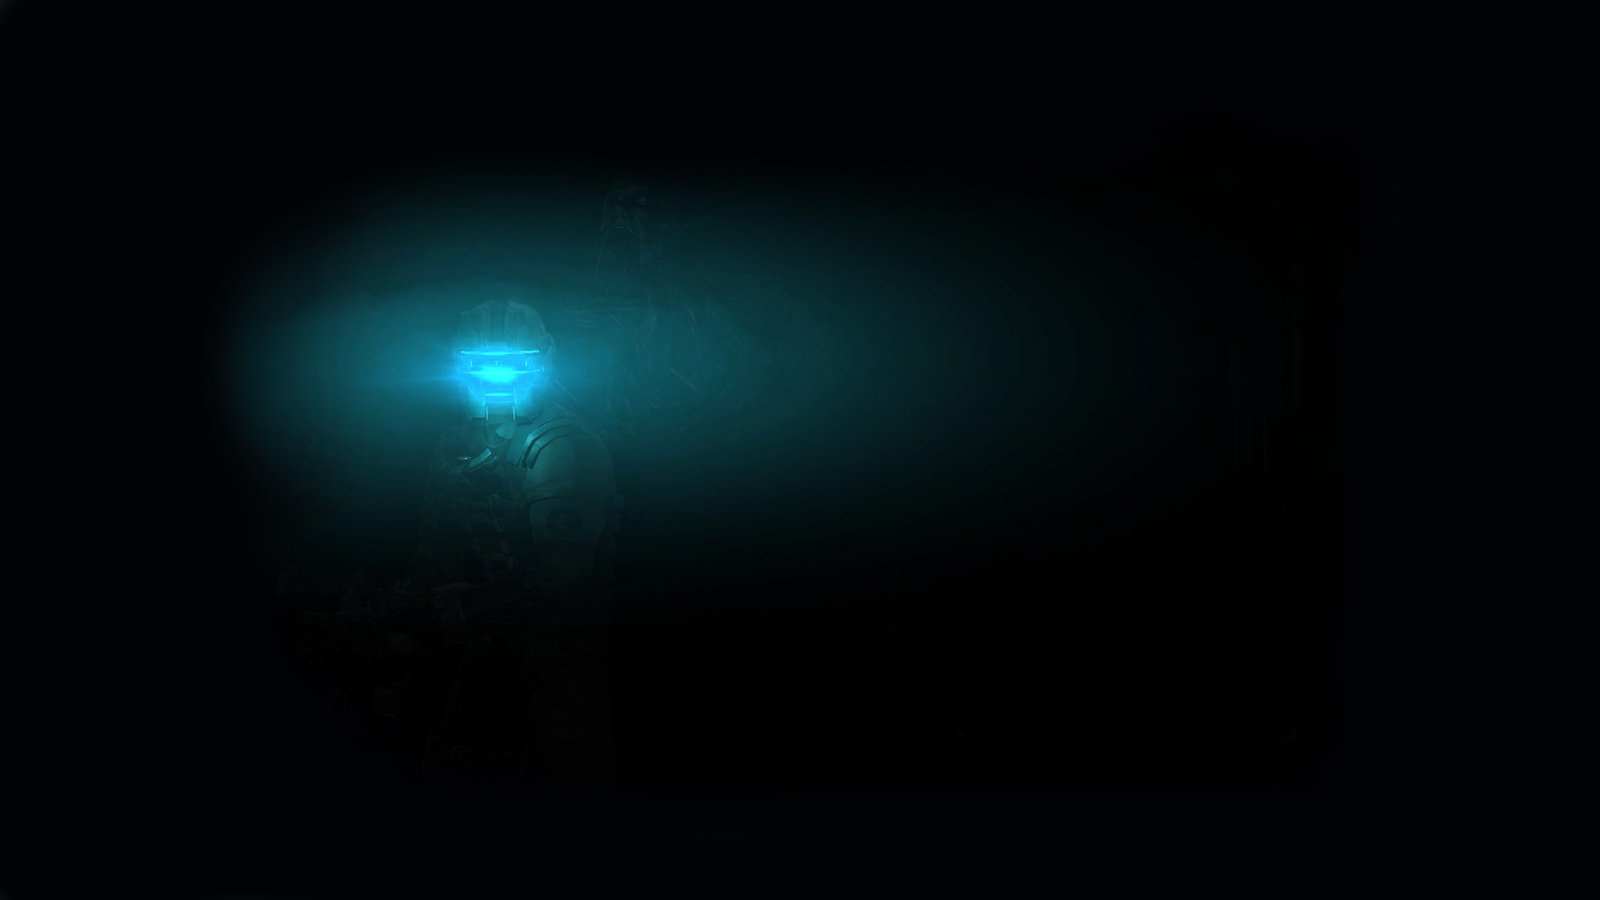 Dead Space Desktop Wallpaper 1920x1080 by FlashBulbProductions on